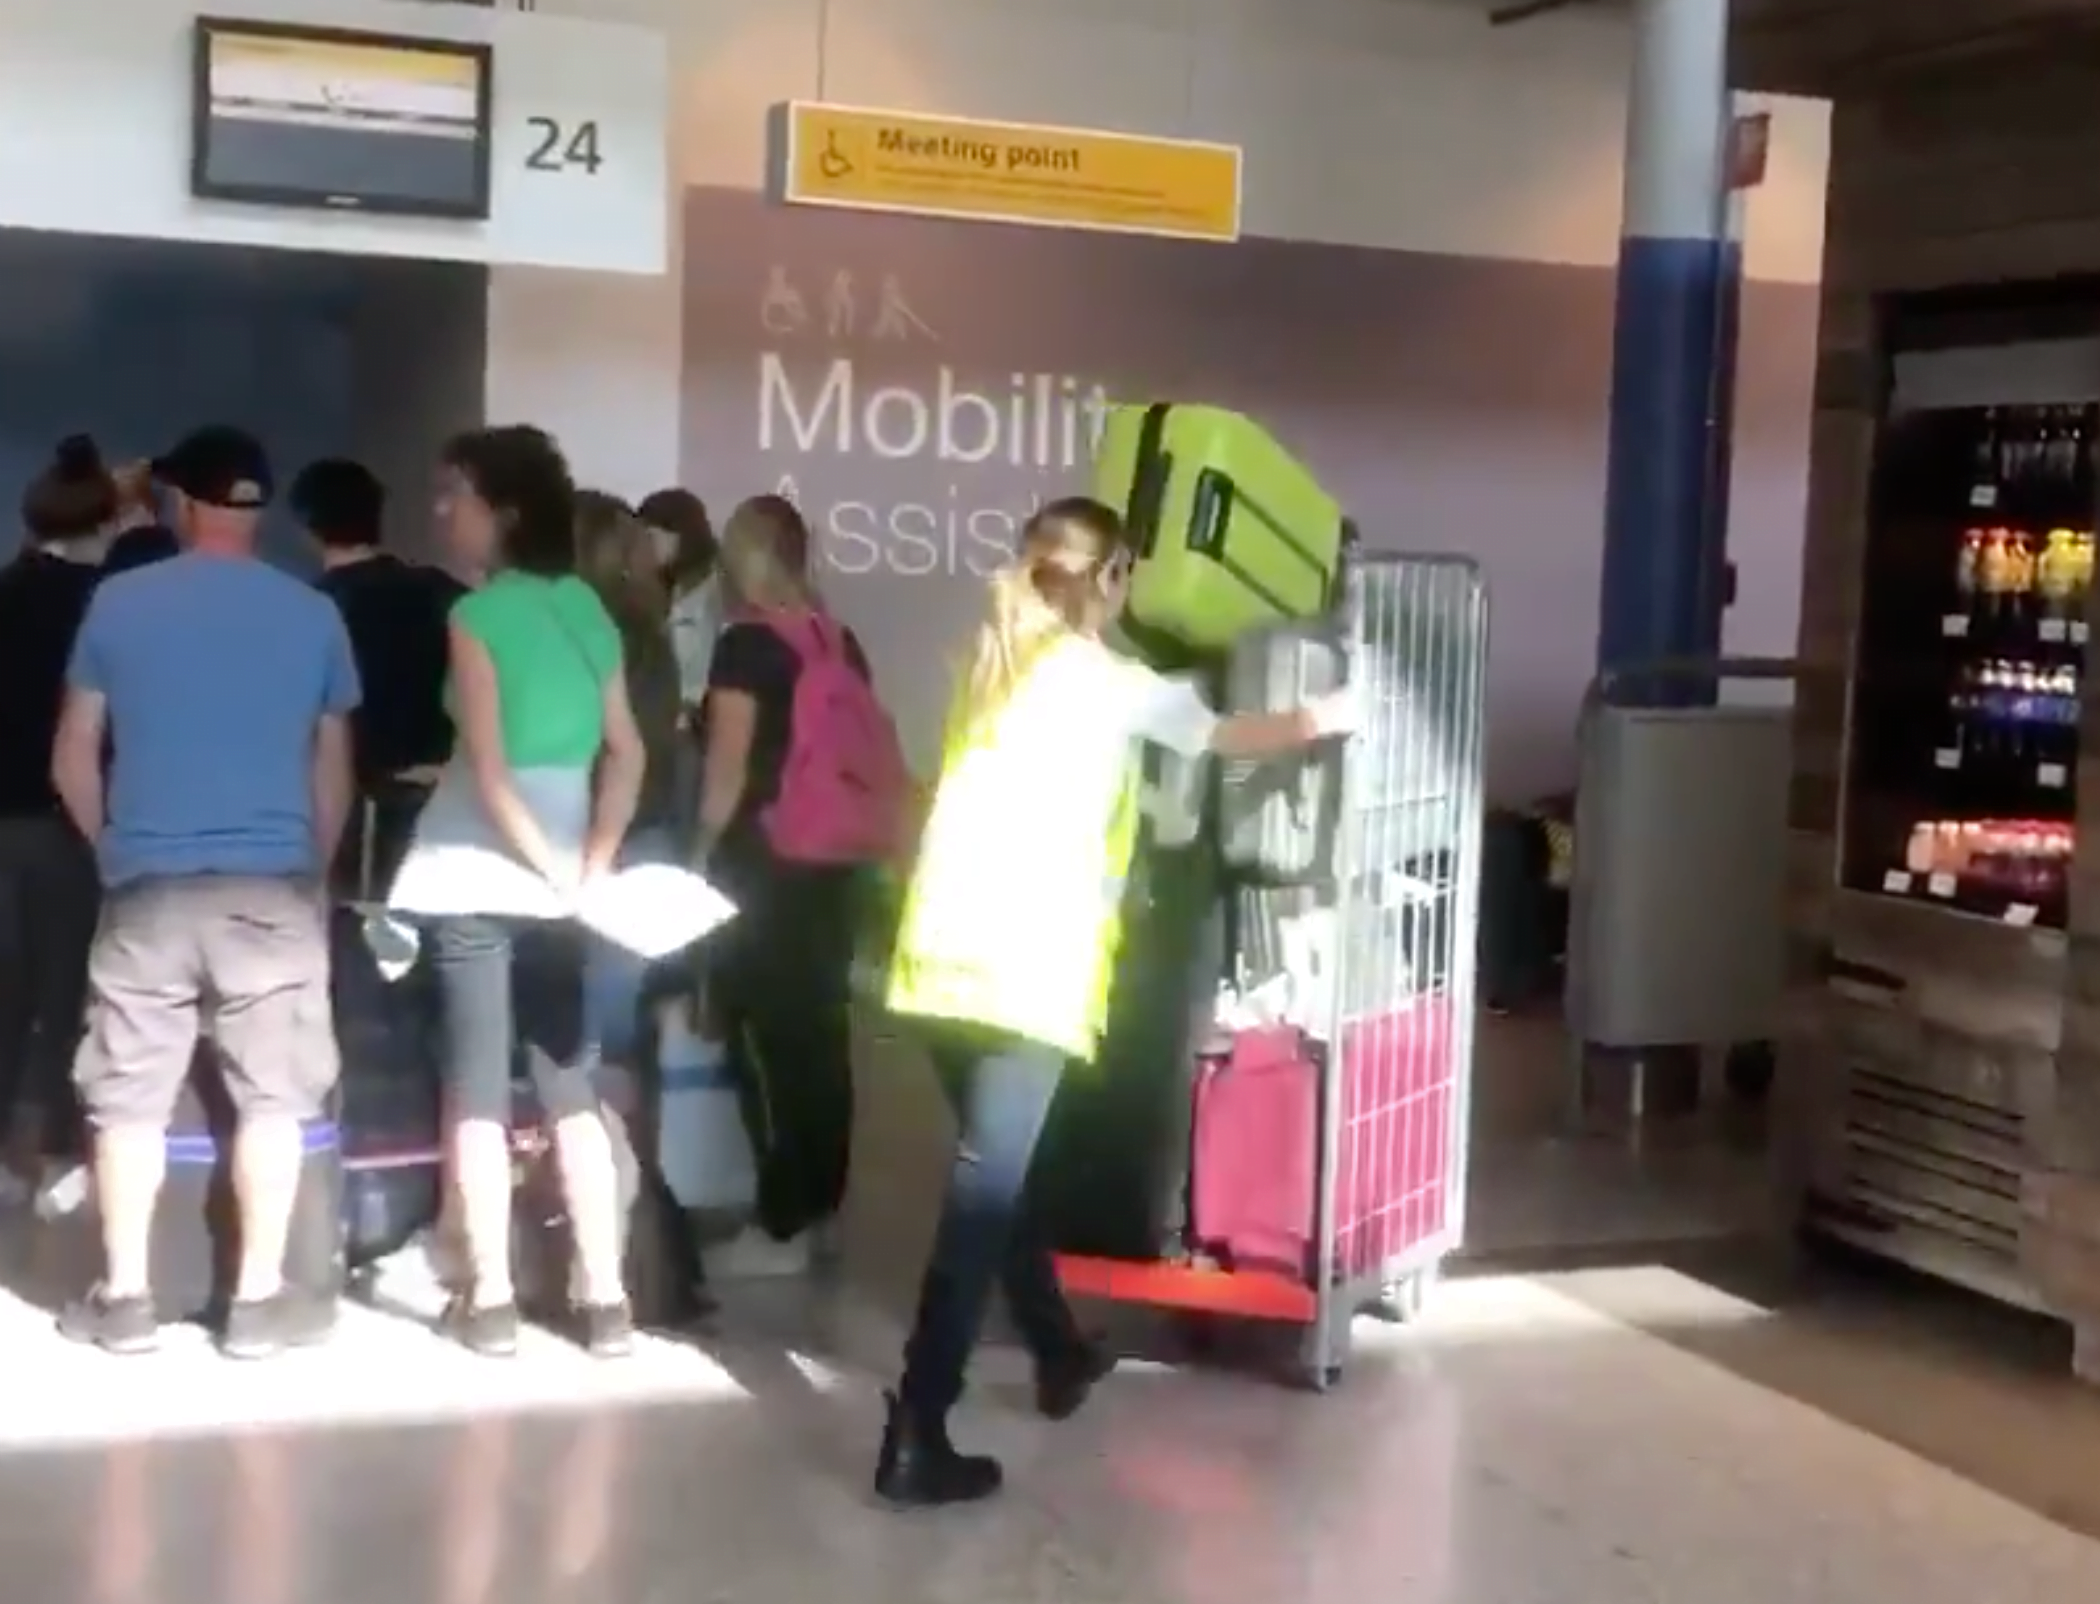 Eindhoven Airport is struggling with a malfunction in the baggage system